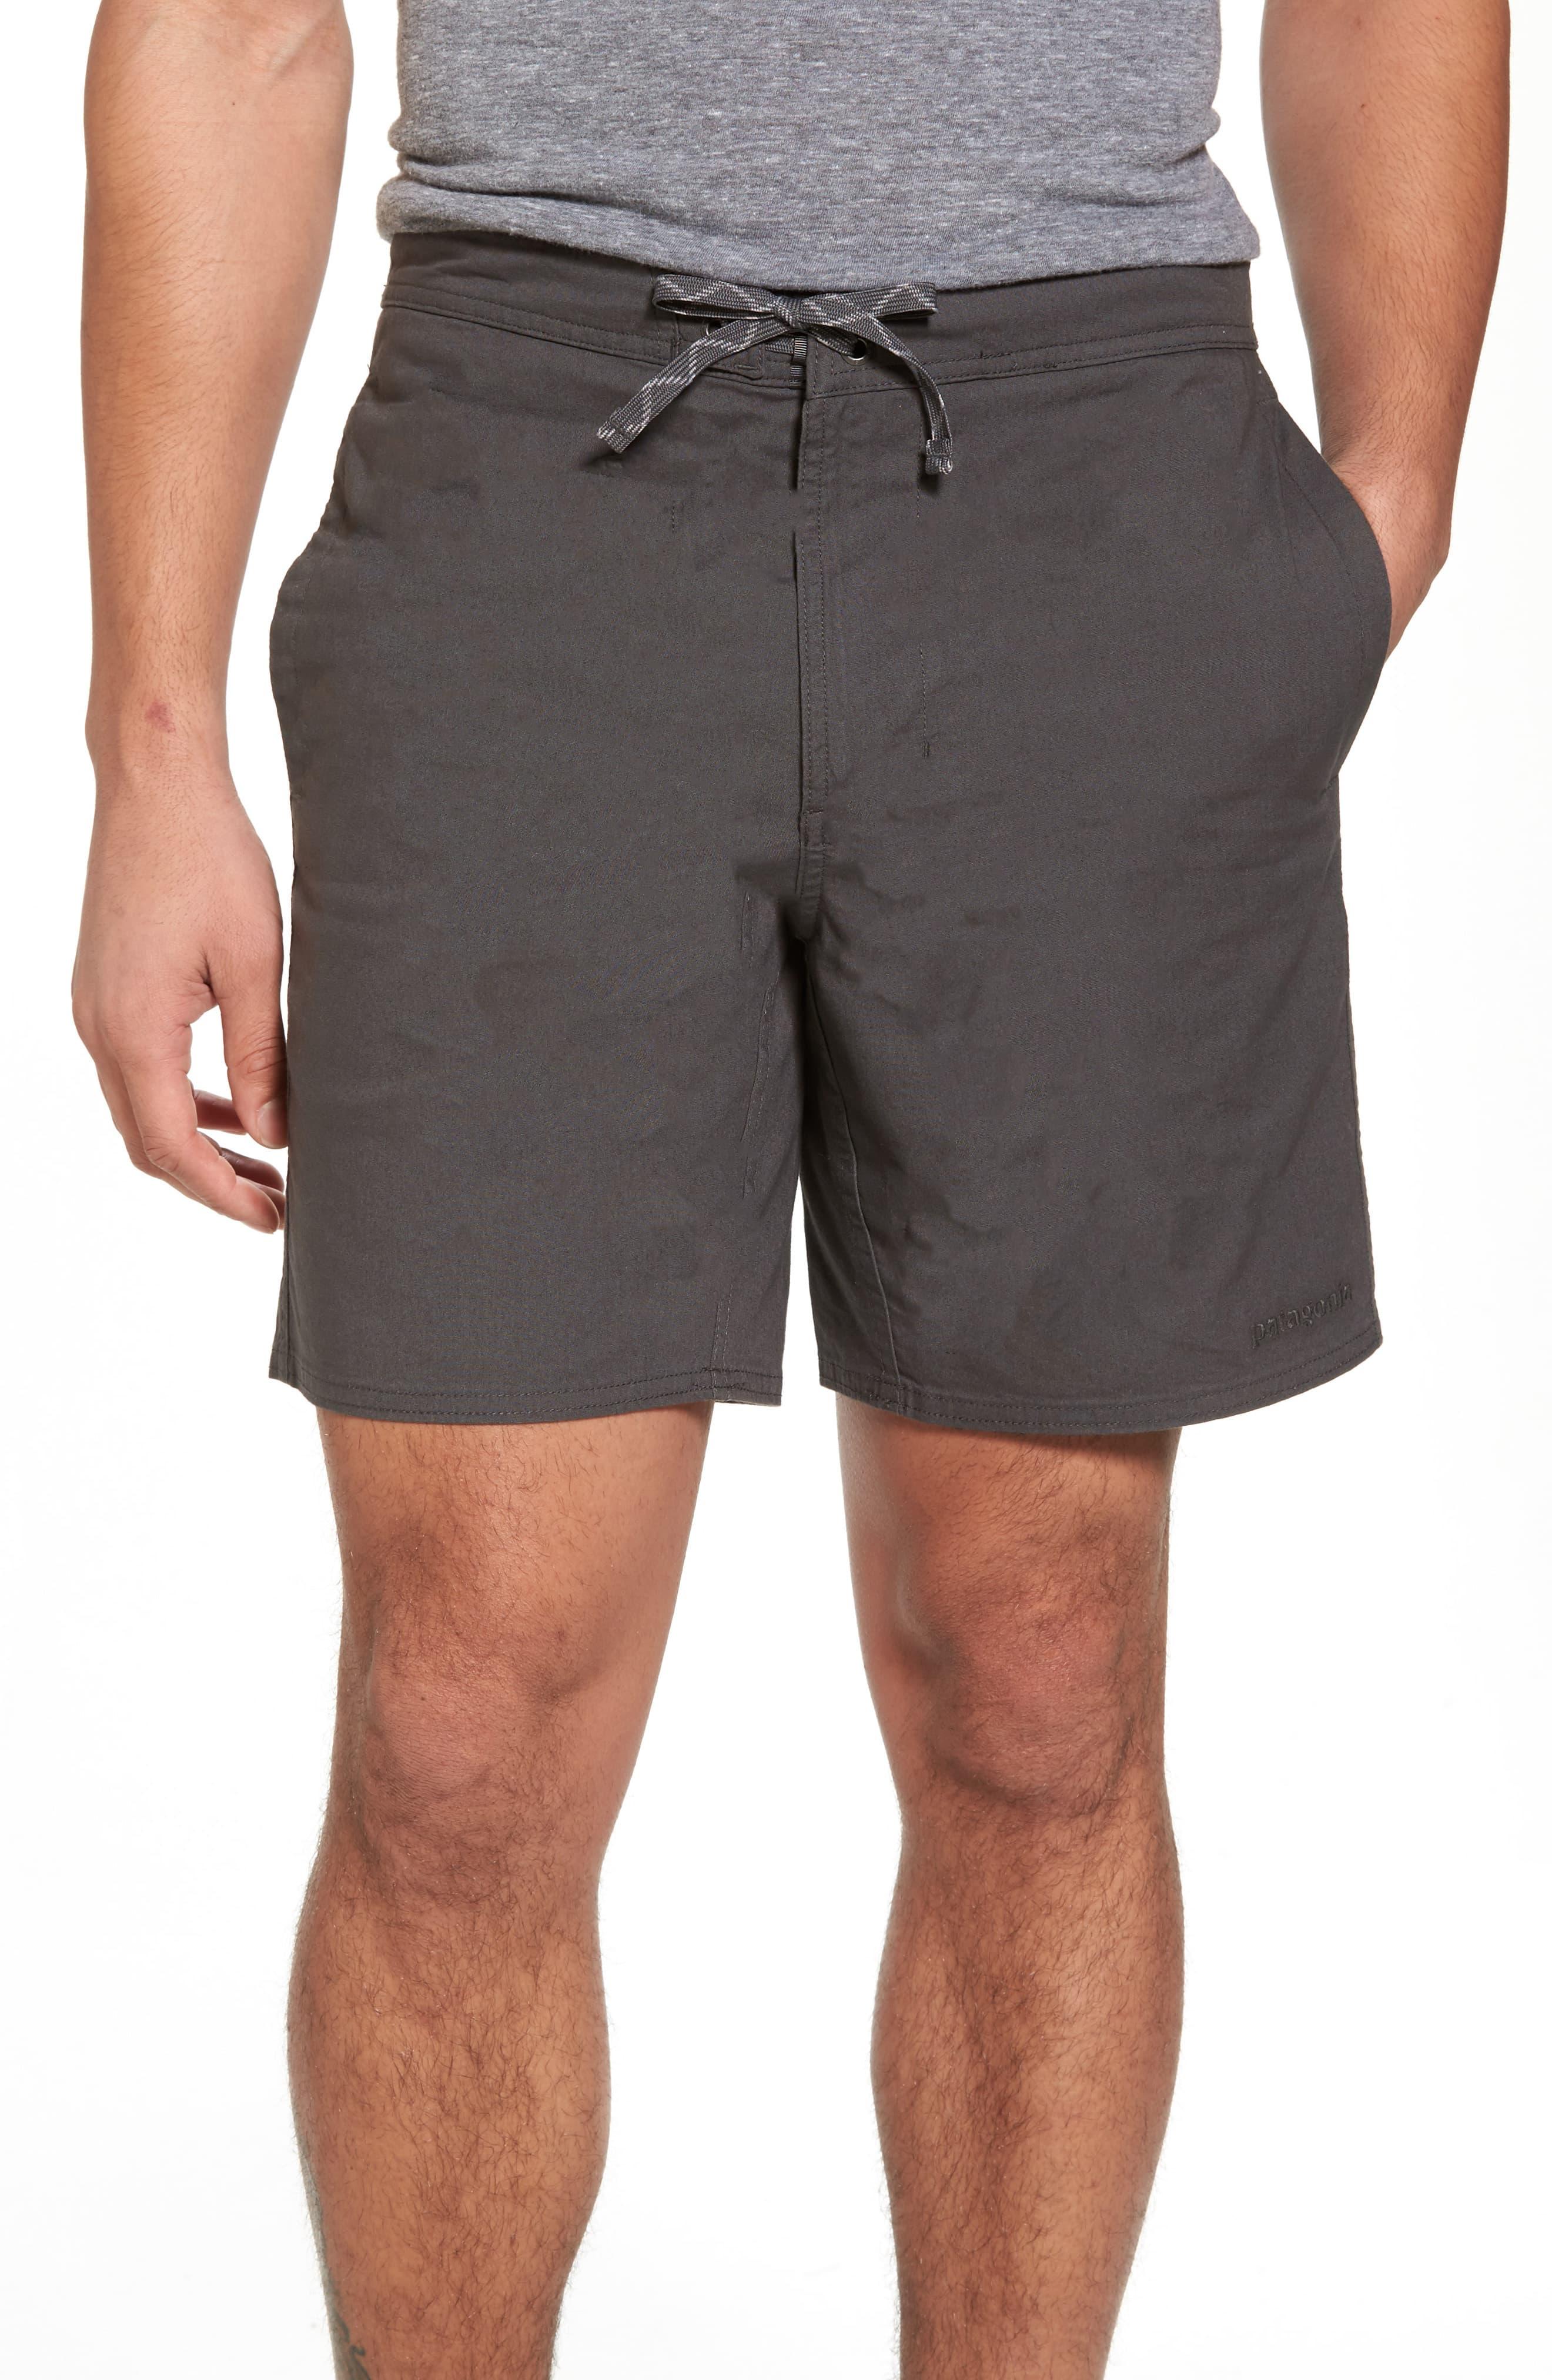 Patagonia Stretch All-wear Hybrid Shorts in Gray for Men - Lyst